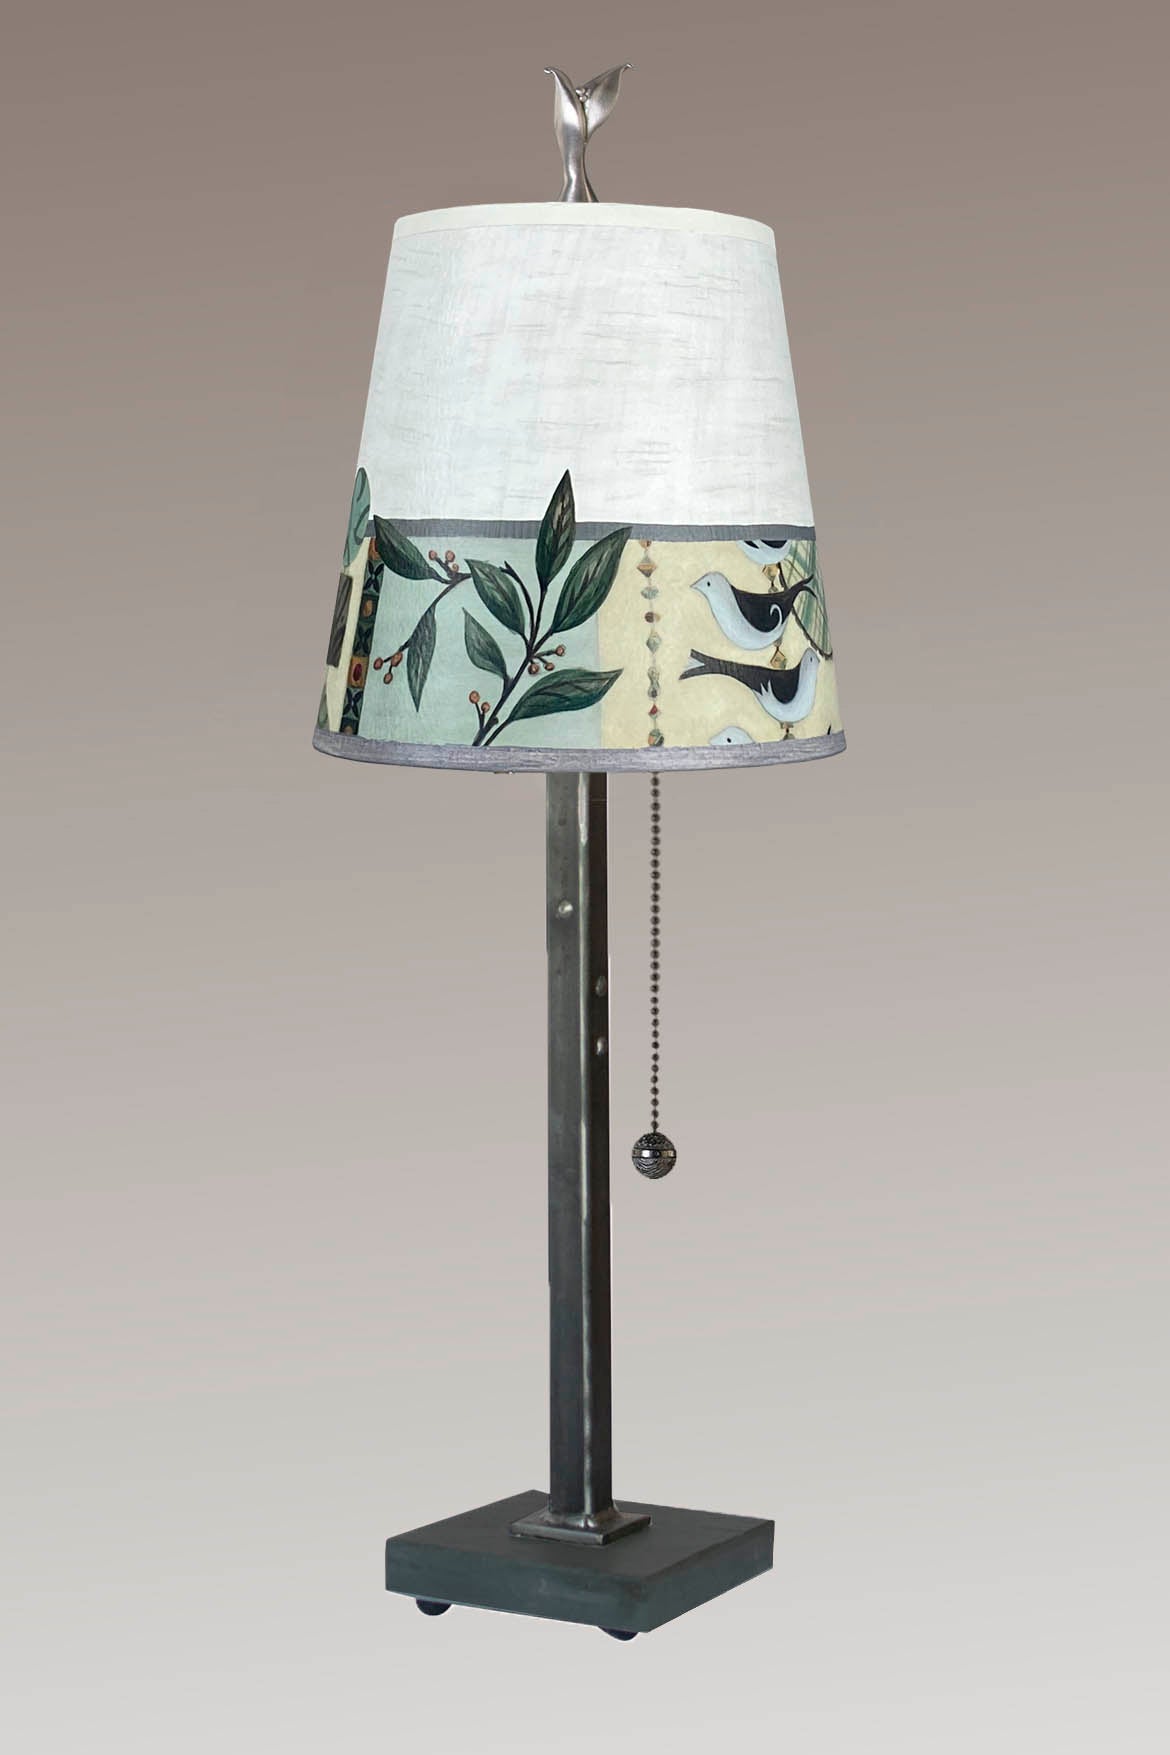 Janna Ugone & Co Table Lamp Steel Table Lamp with Small Drum Shade in New Capri Opal